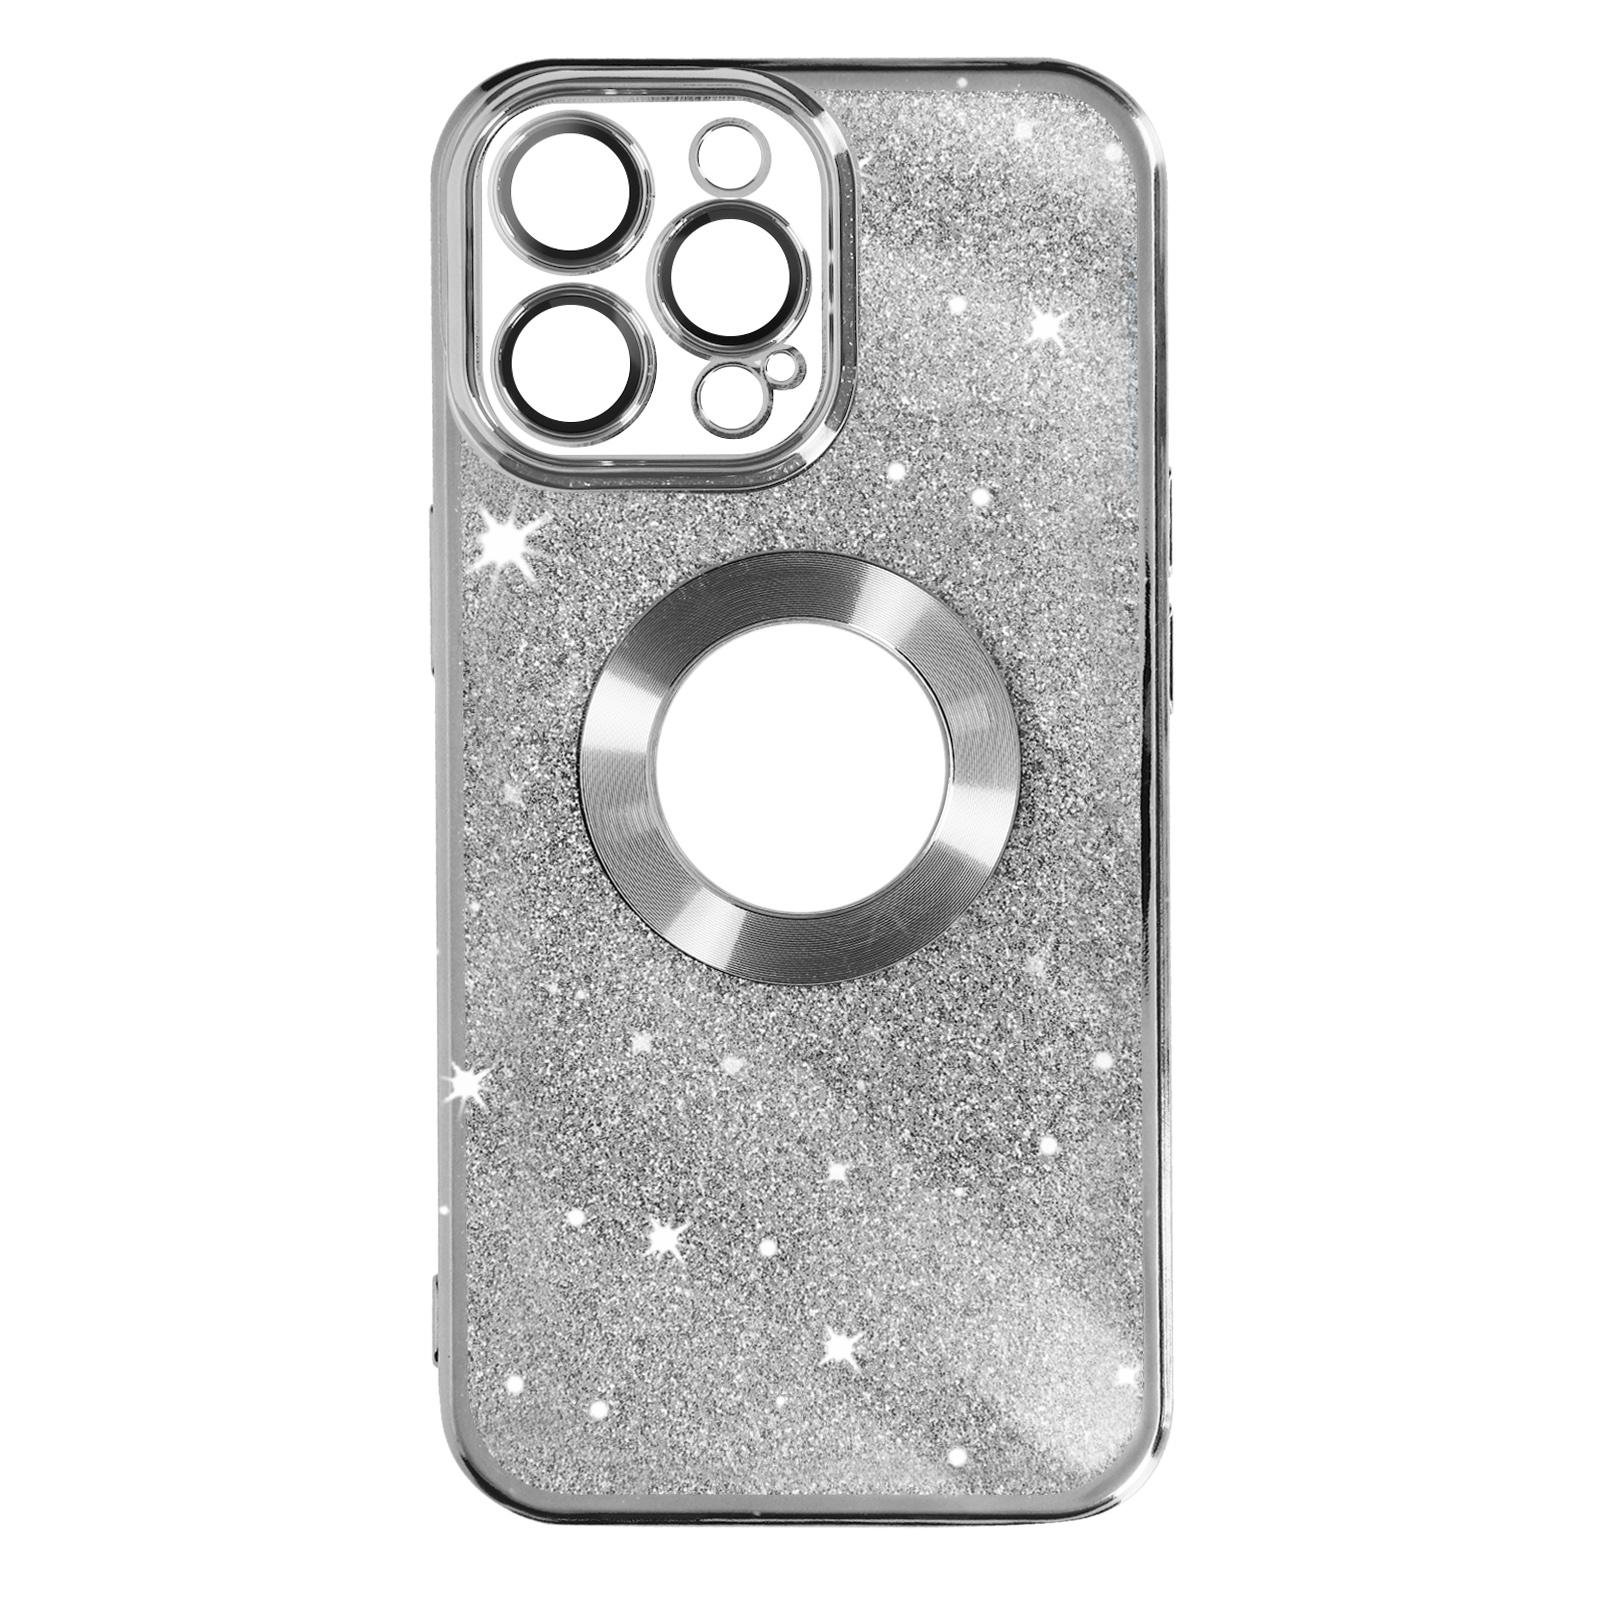 AVIZAR Protecam Spark Series, iPhone Max, Silber 14 Pro Backcover, Apple